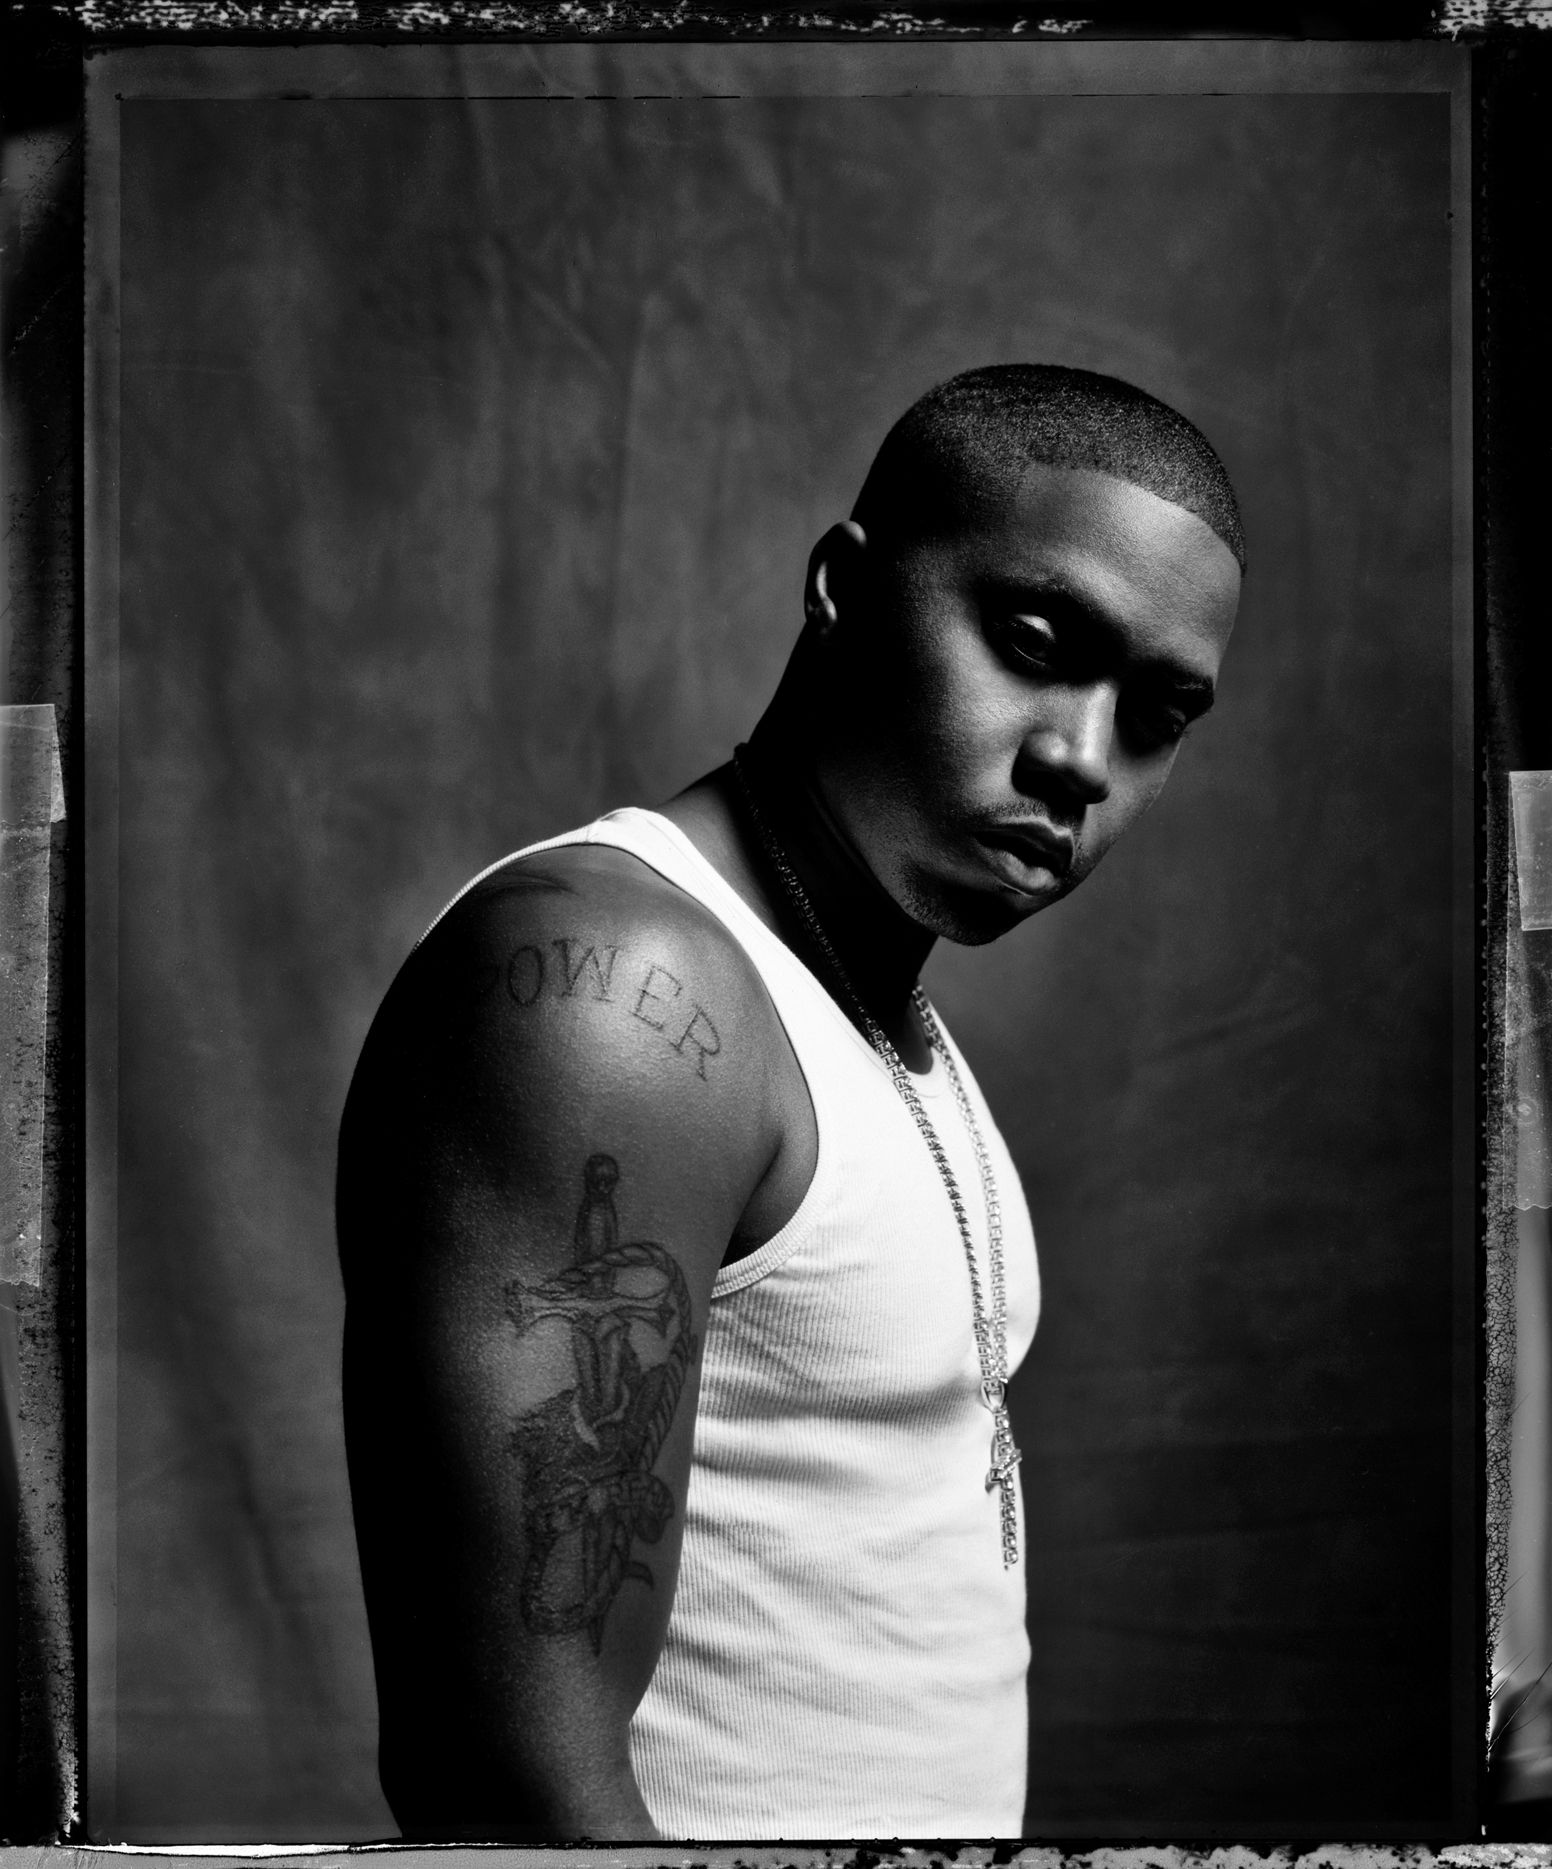 Nas photo gallery - 24 high quality pics of Nas | ThePlace